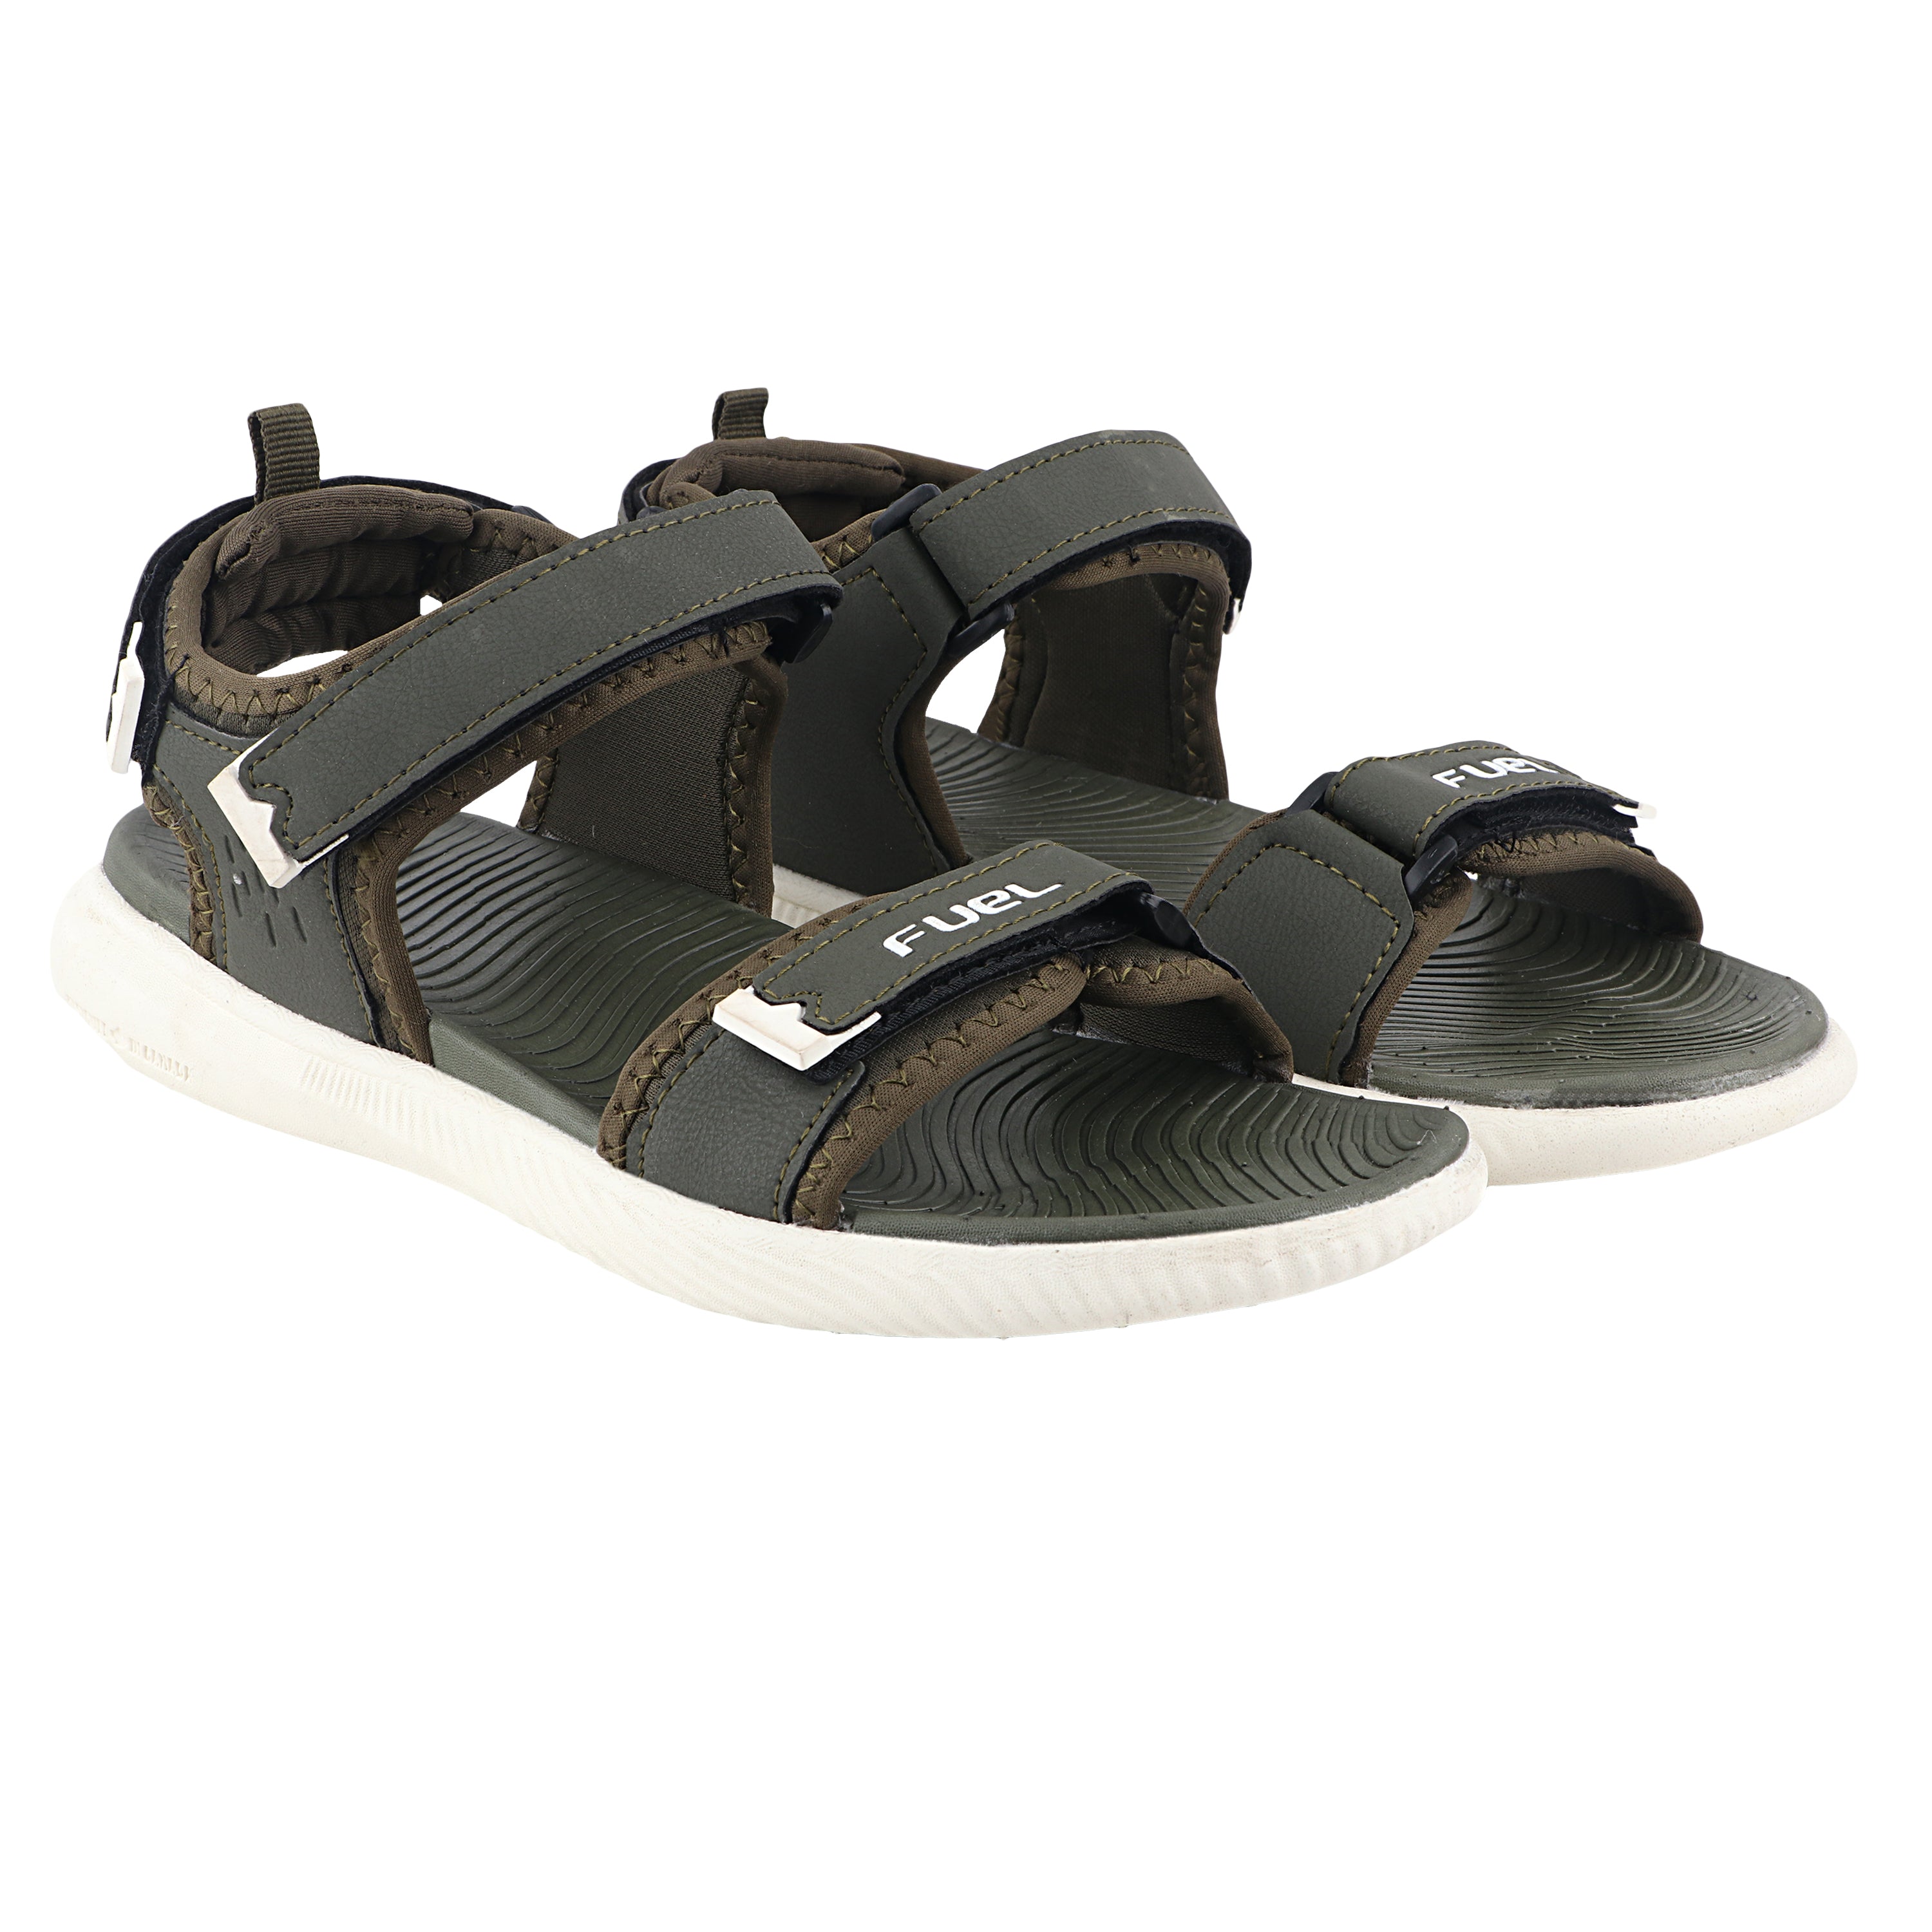 Fuel Power-Lite Sandals For Women's (Olive)